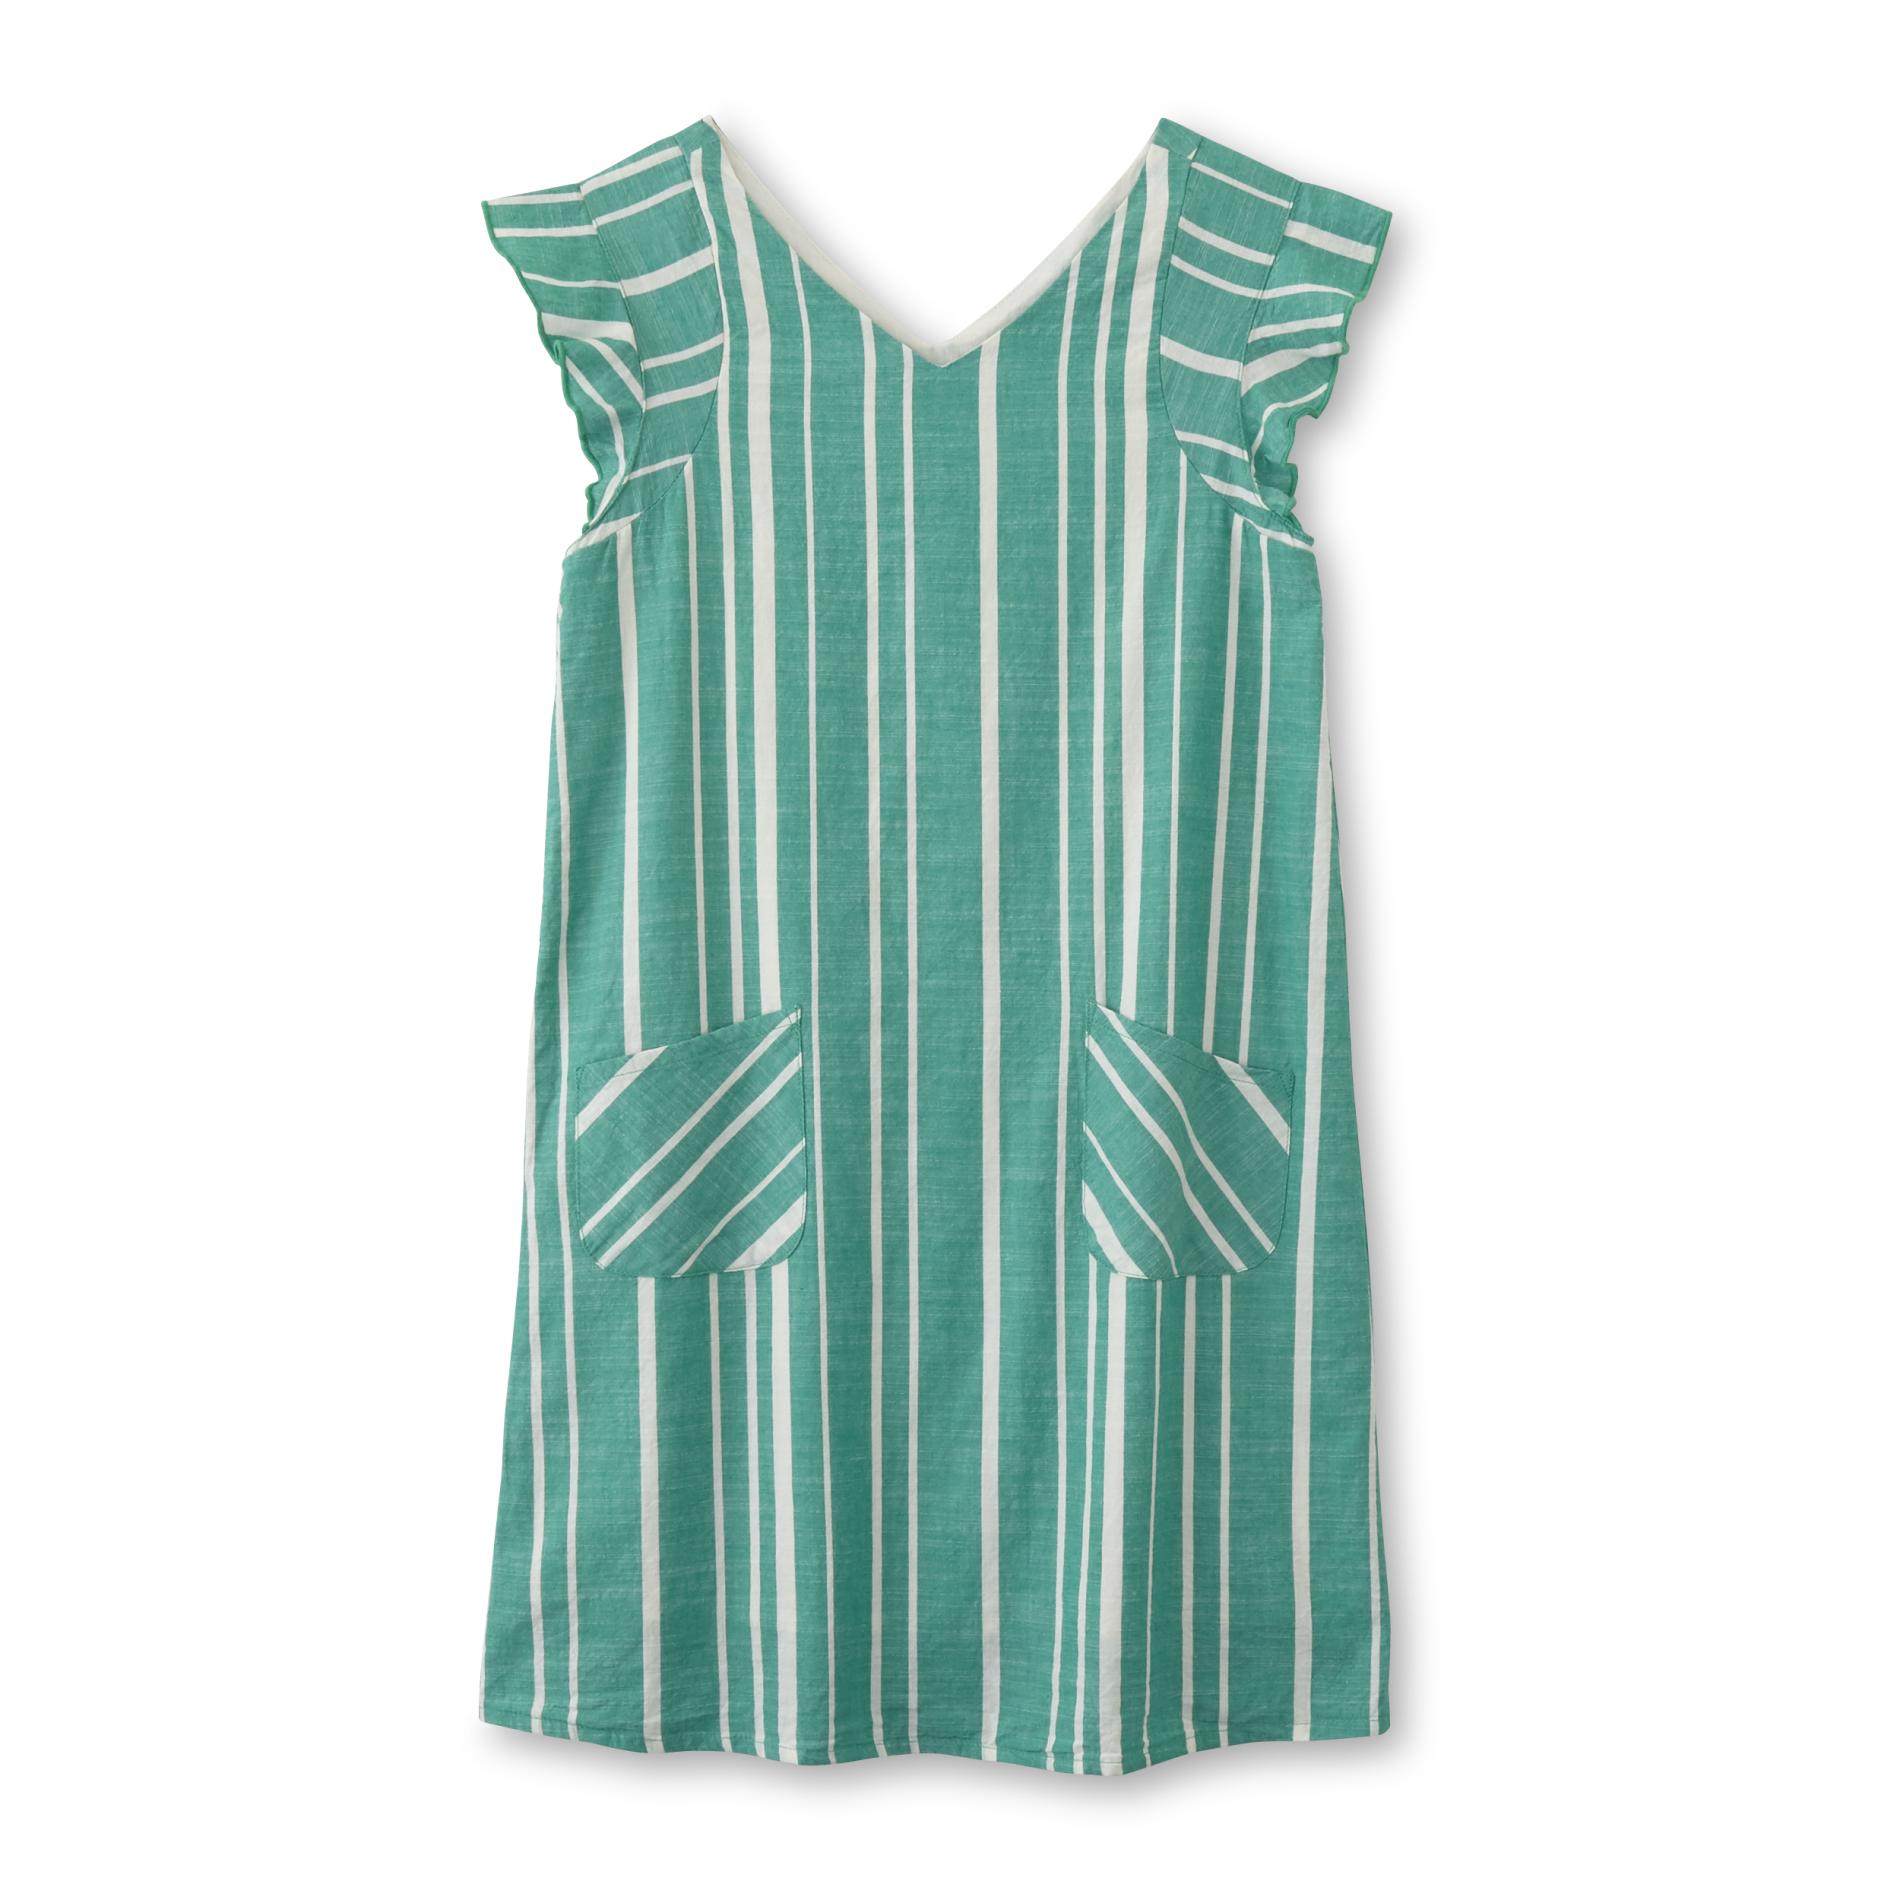 Simply Styled Girls' Woven Shift Dress - Striped